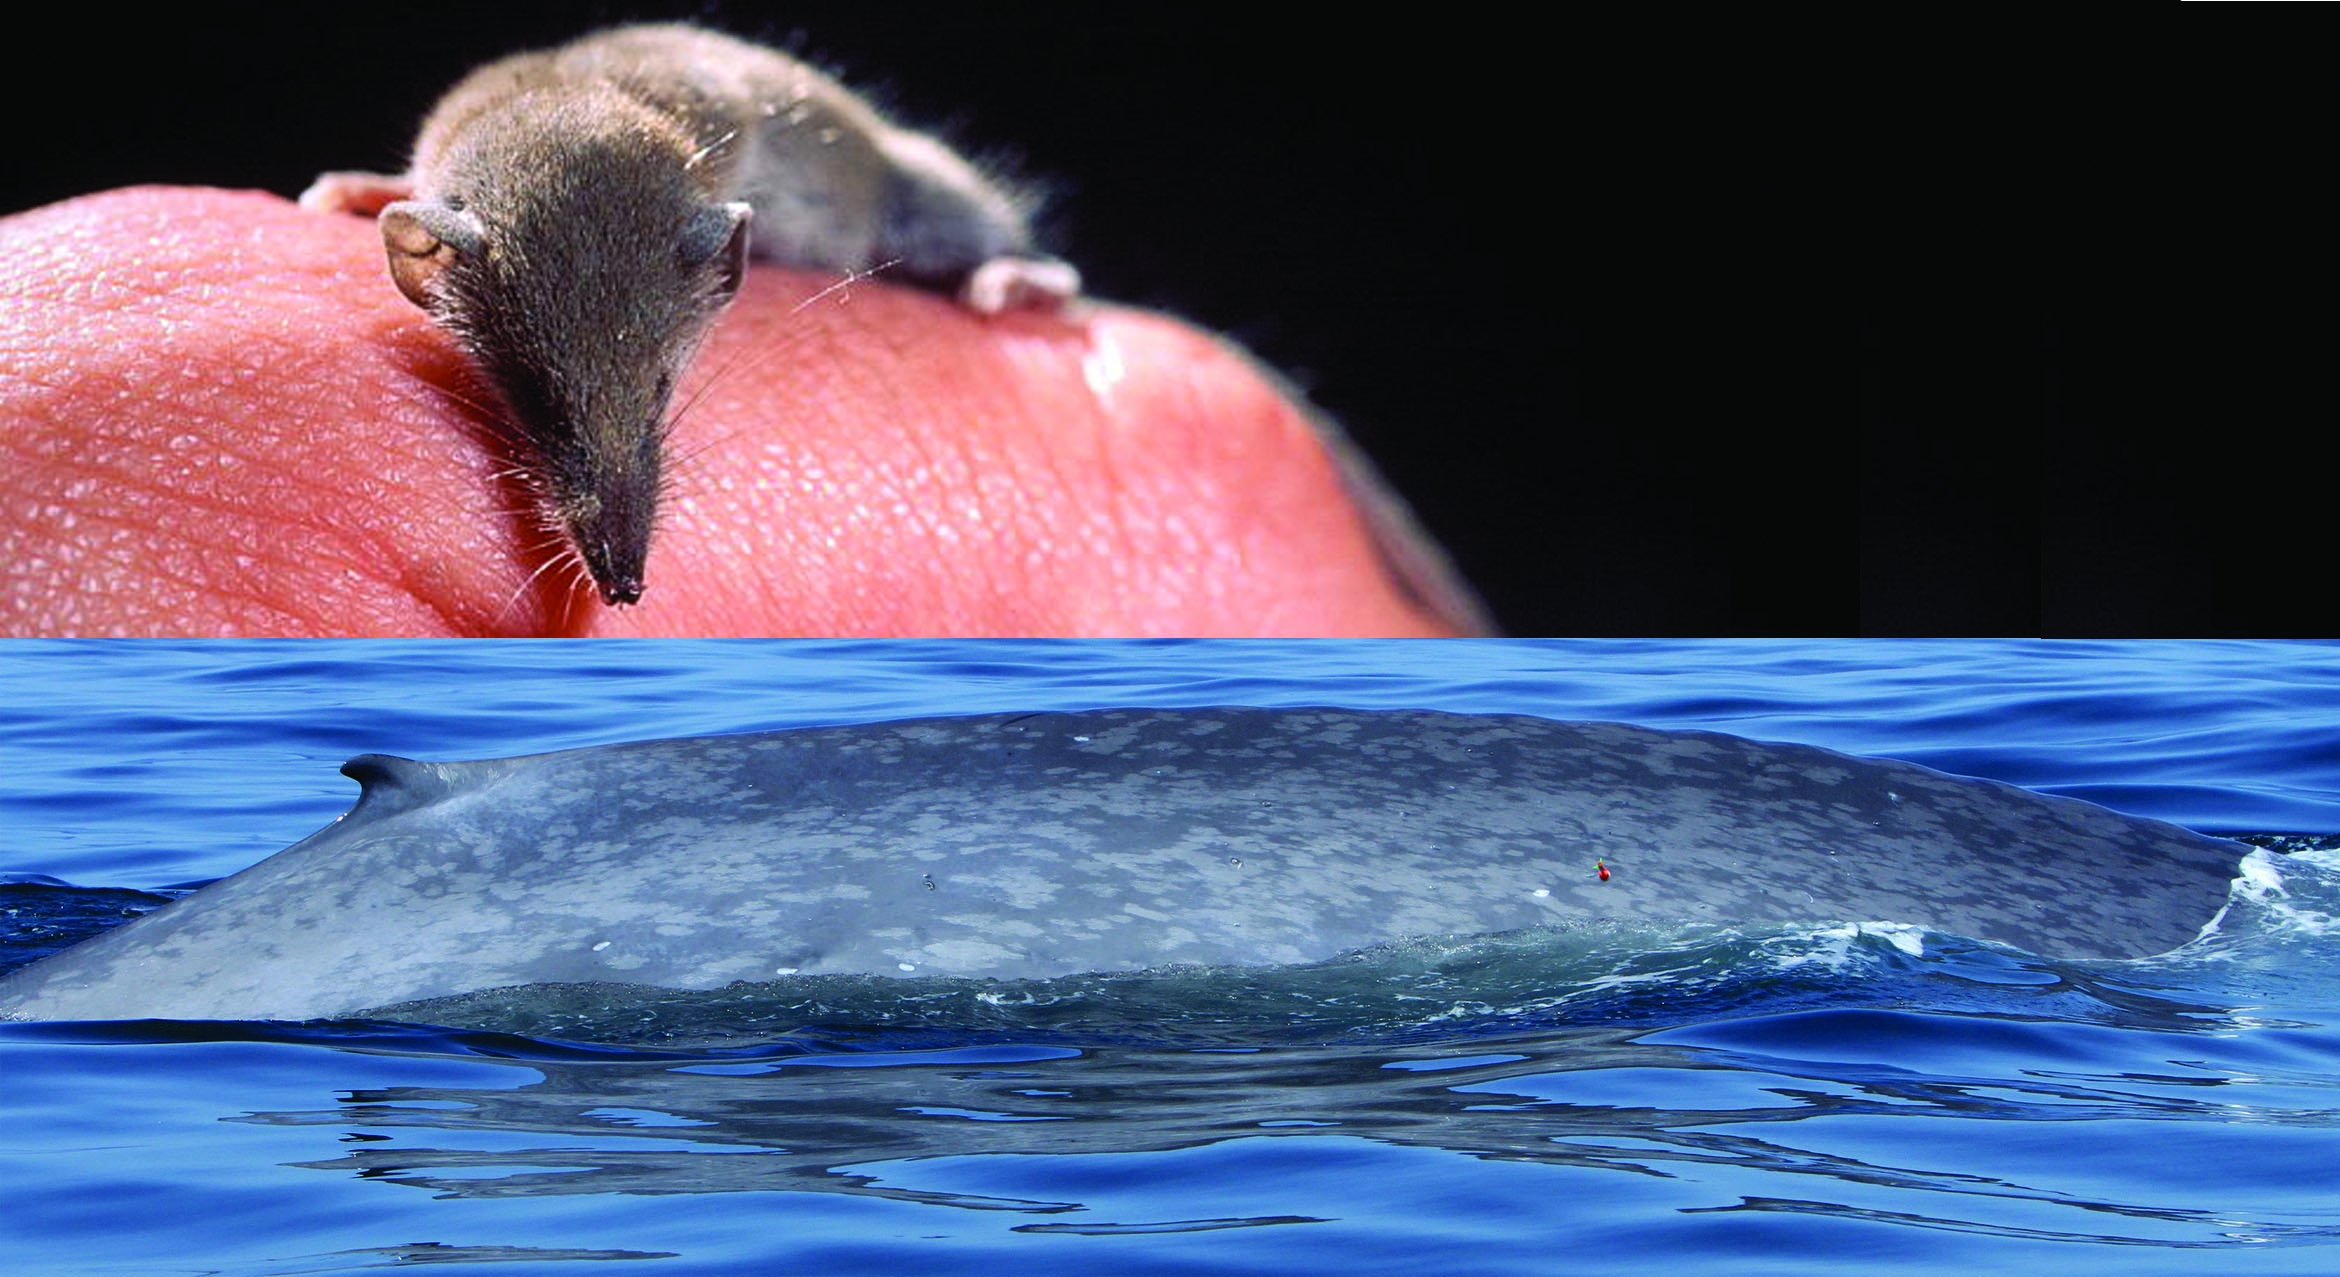 Two views: An Etruscan shrew and the breeching hide of a blue whale